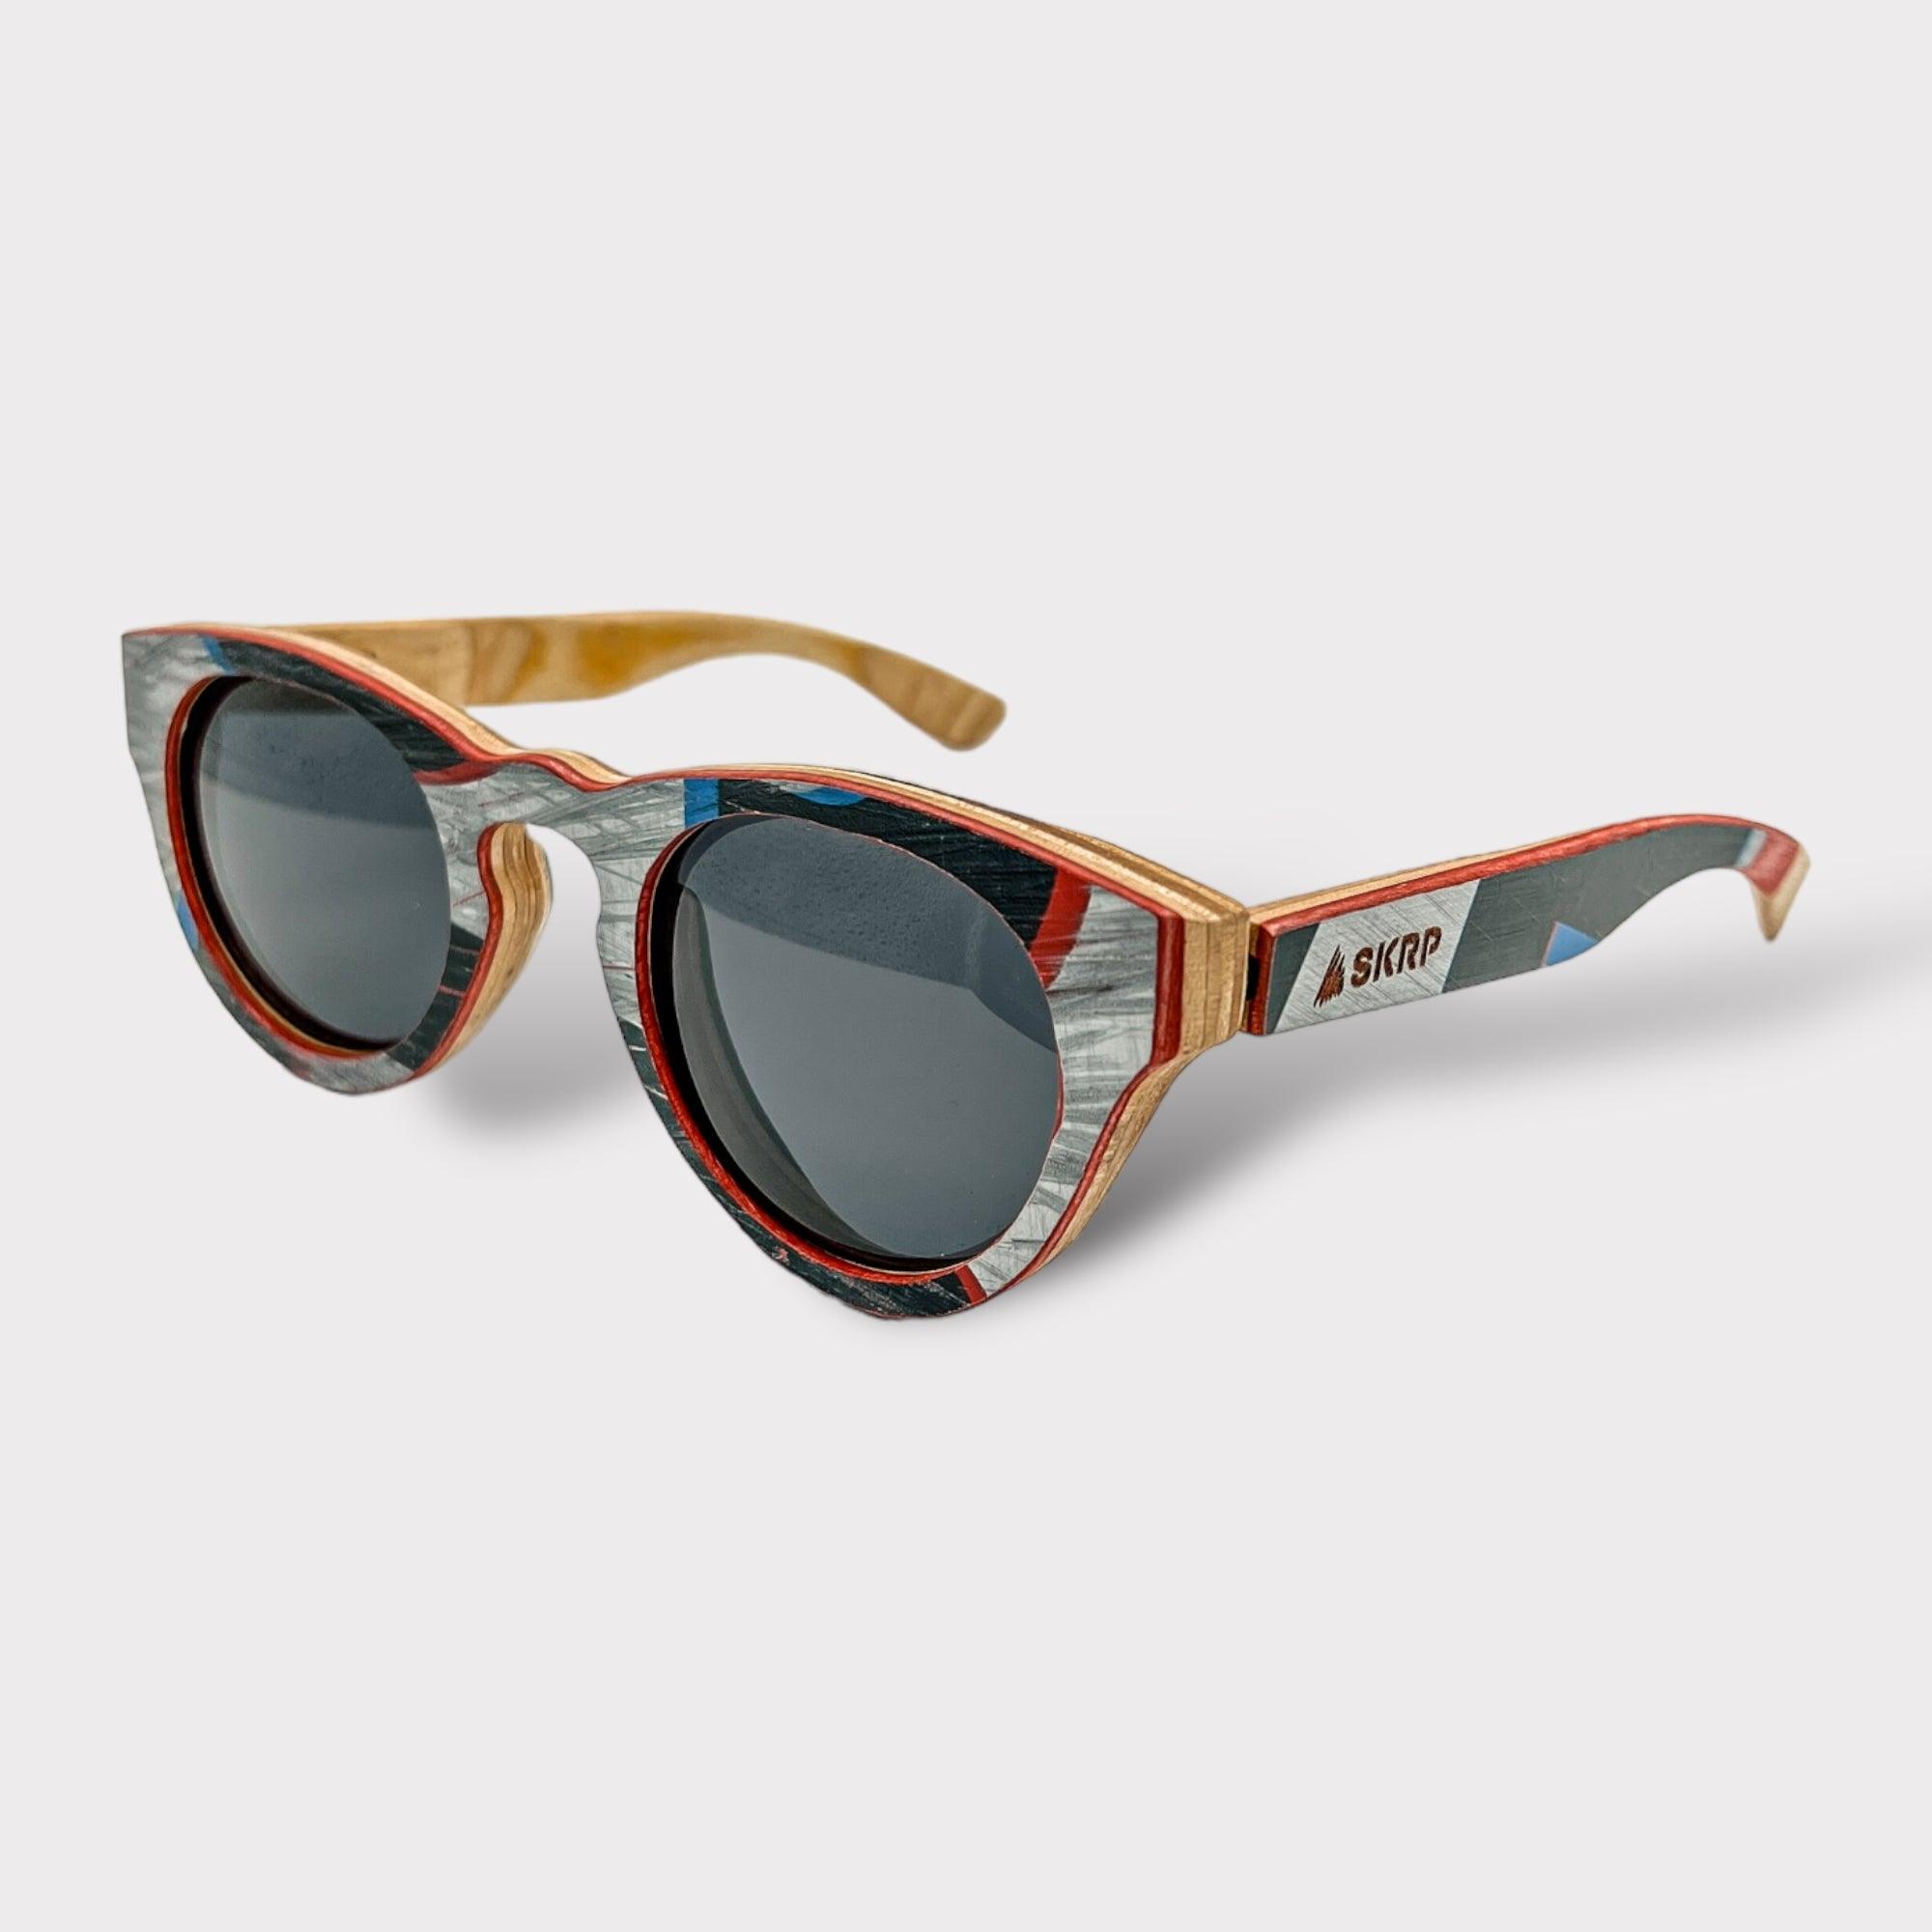 Upcycled Wooden Skateboard Sunglasses - Round - Upcycleco 